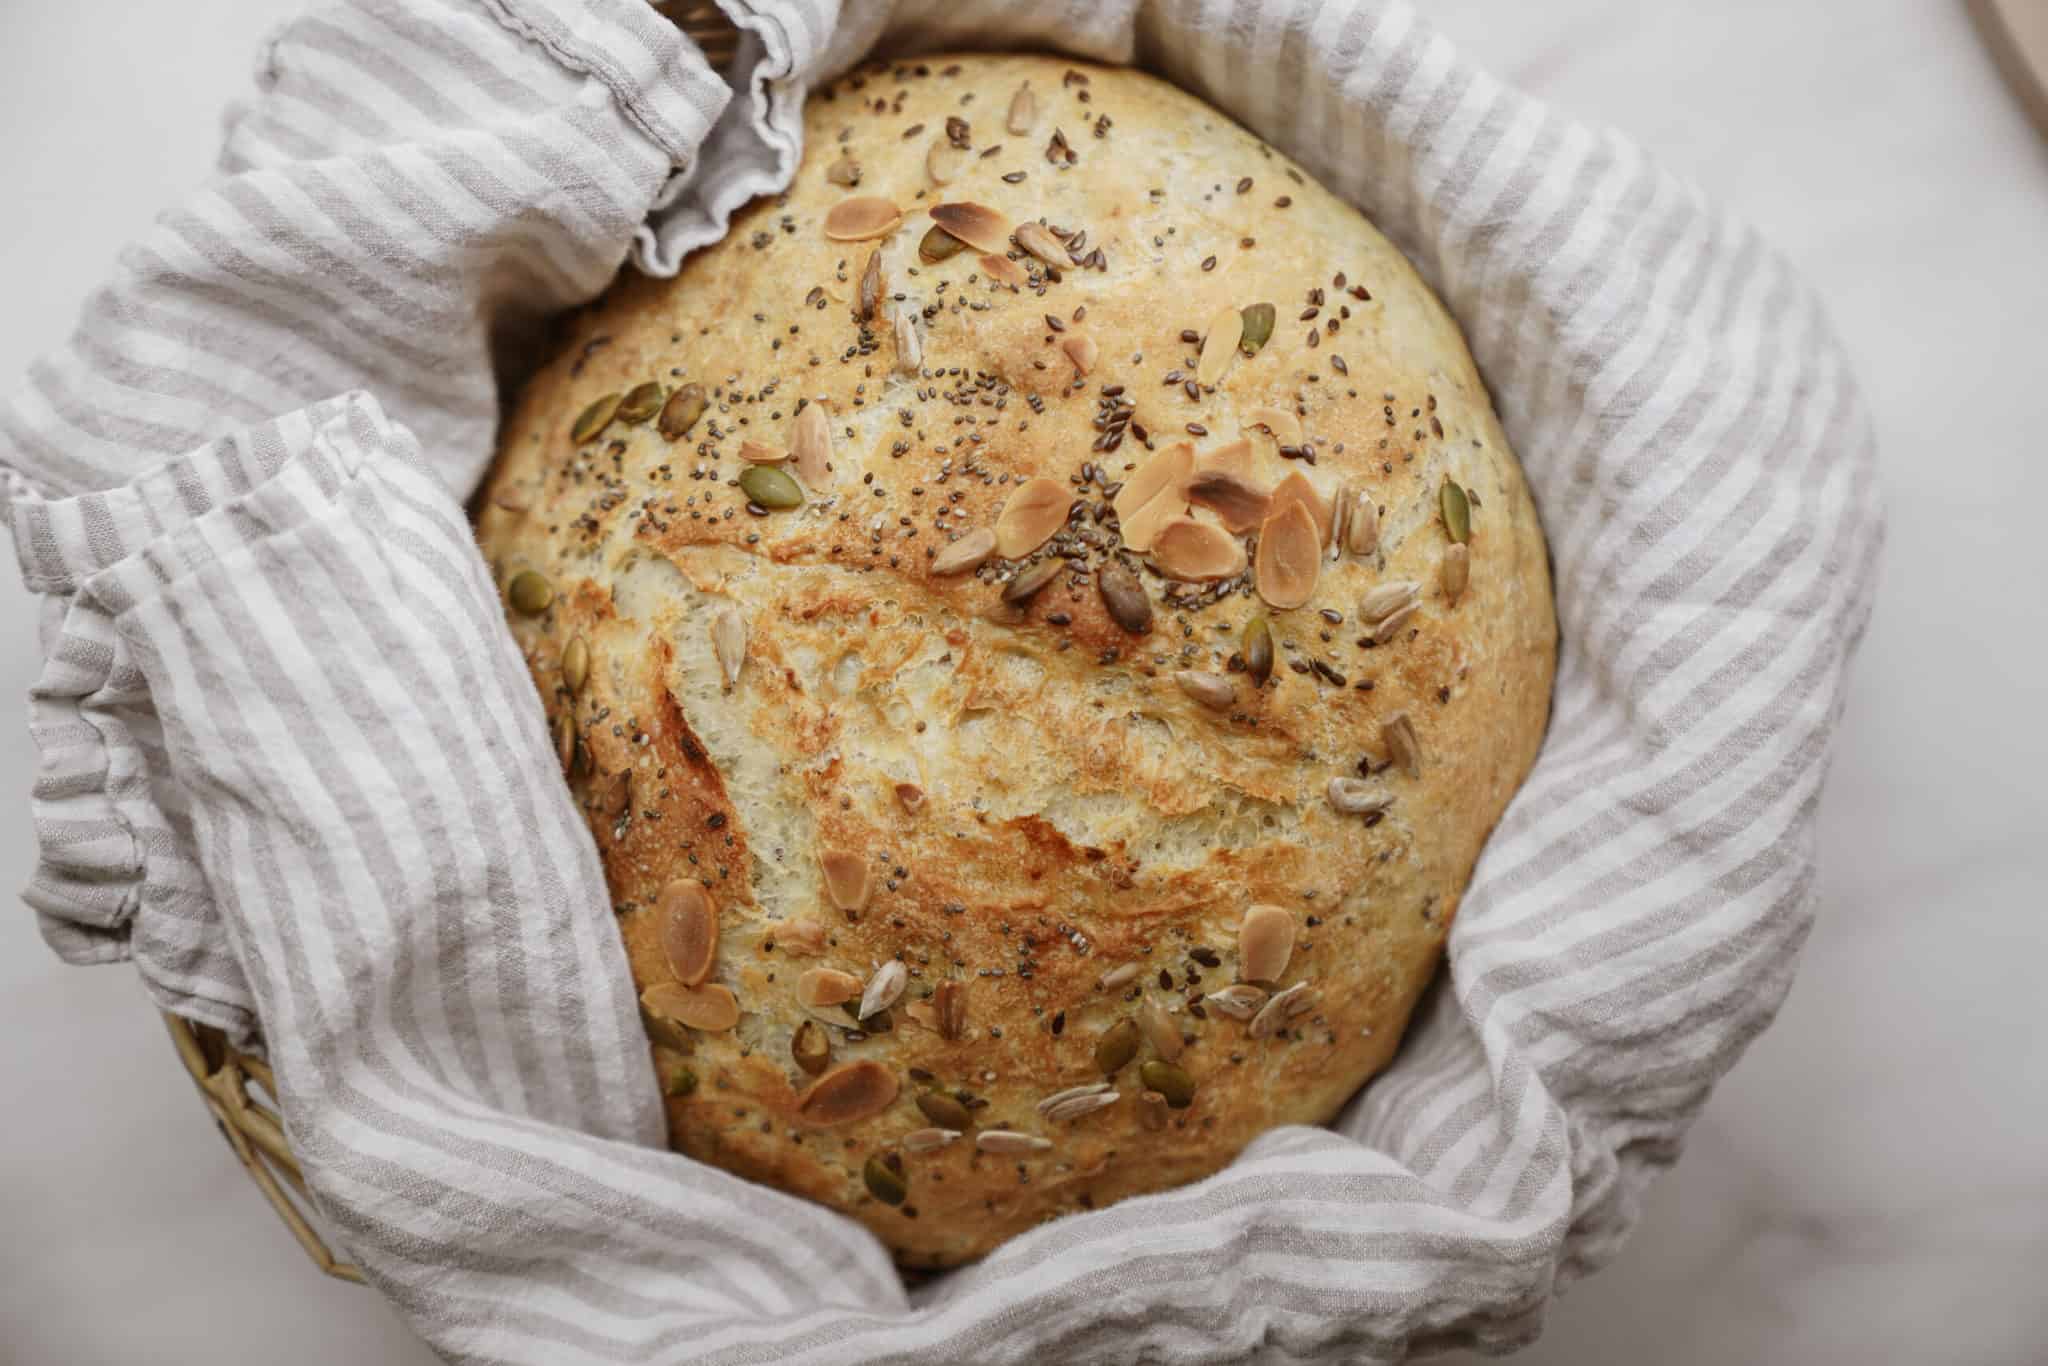 https://www.foodbymaria.com/wp-content/uploads/2022/01/Dutch-Oven-Bread-Recipes-4-scaled.jpg